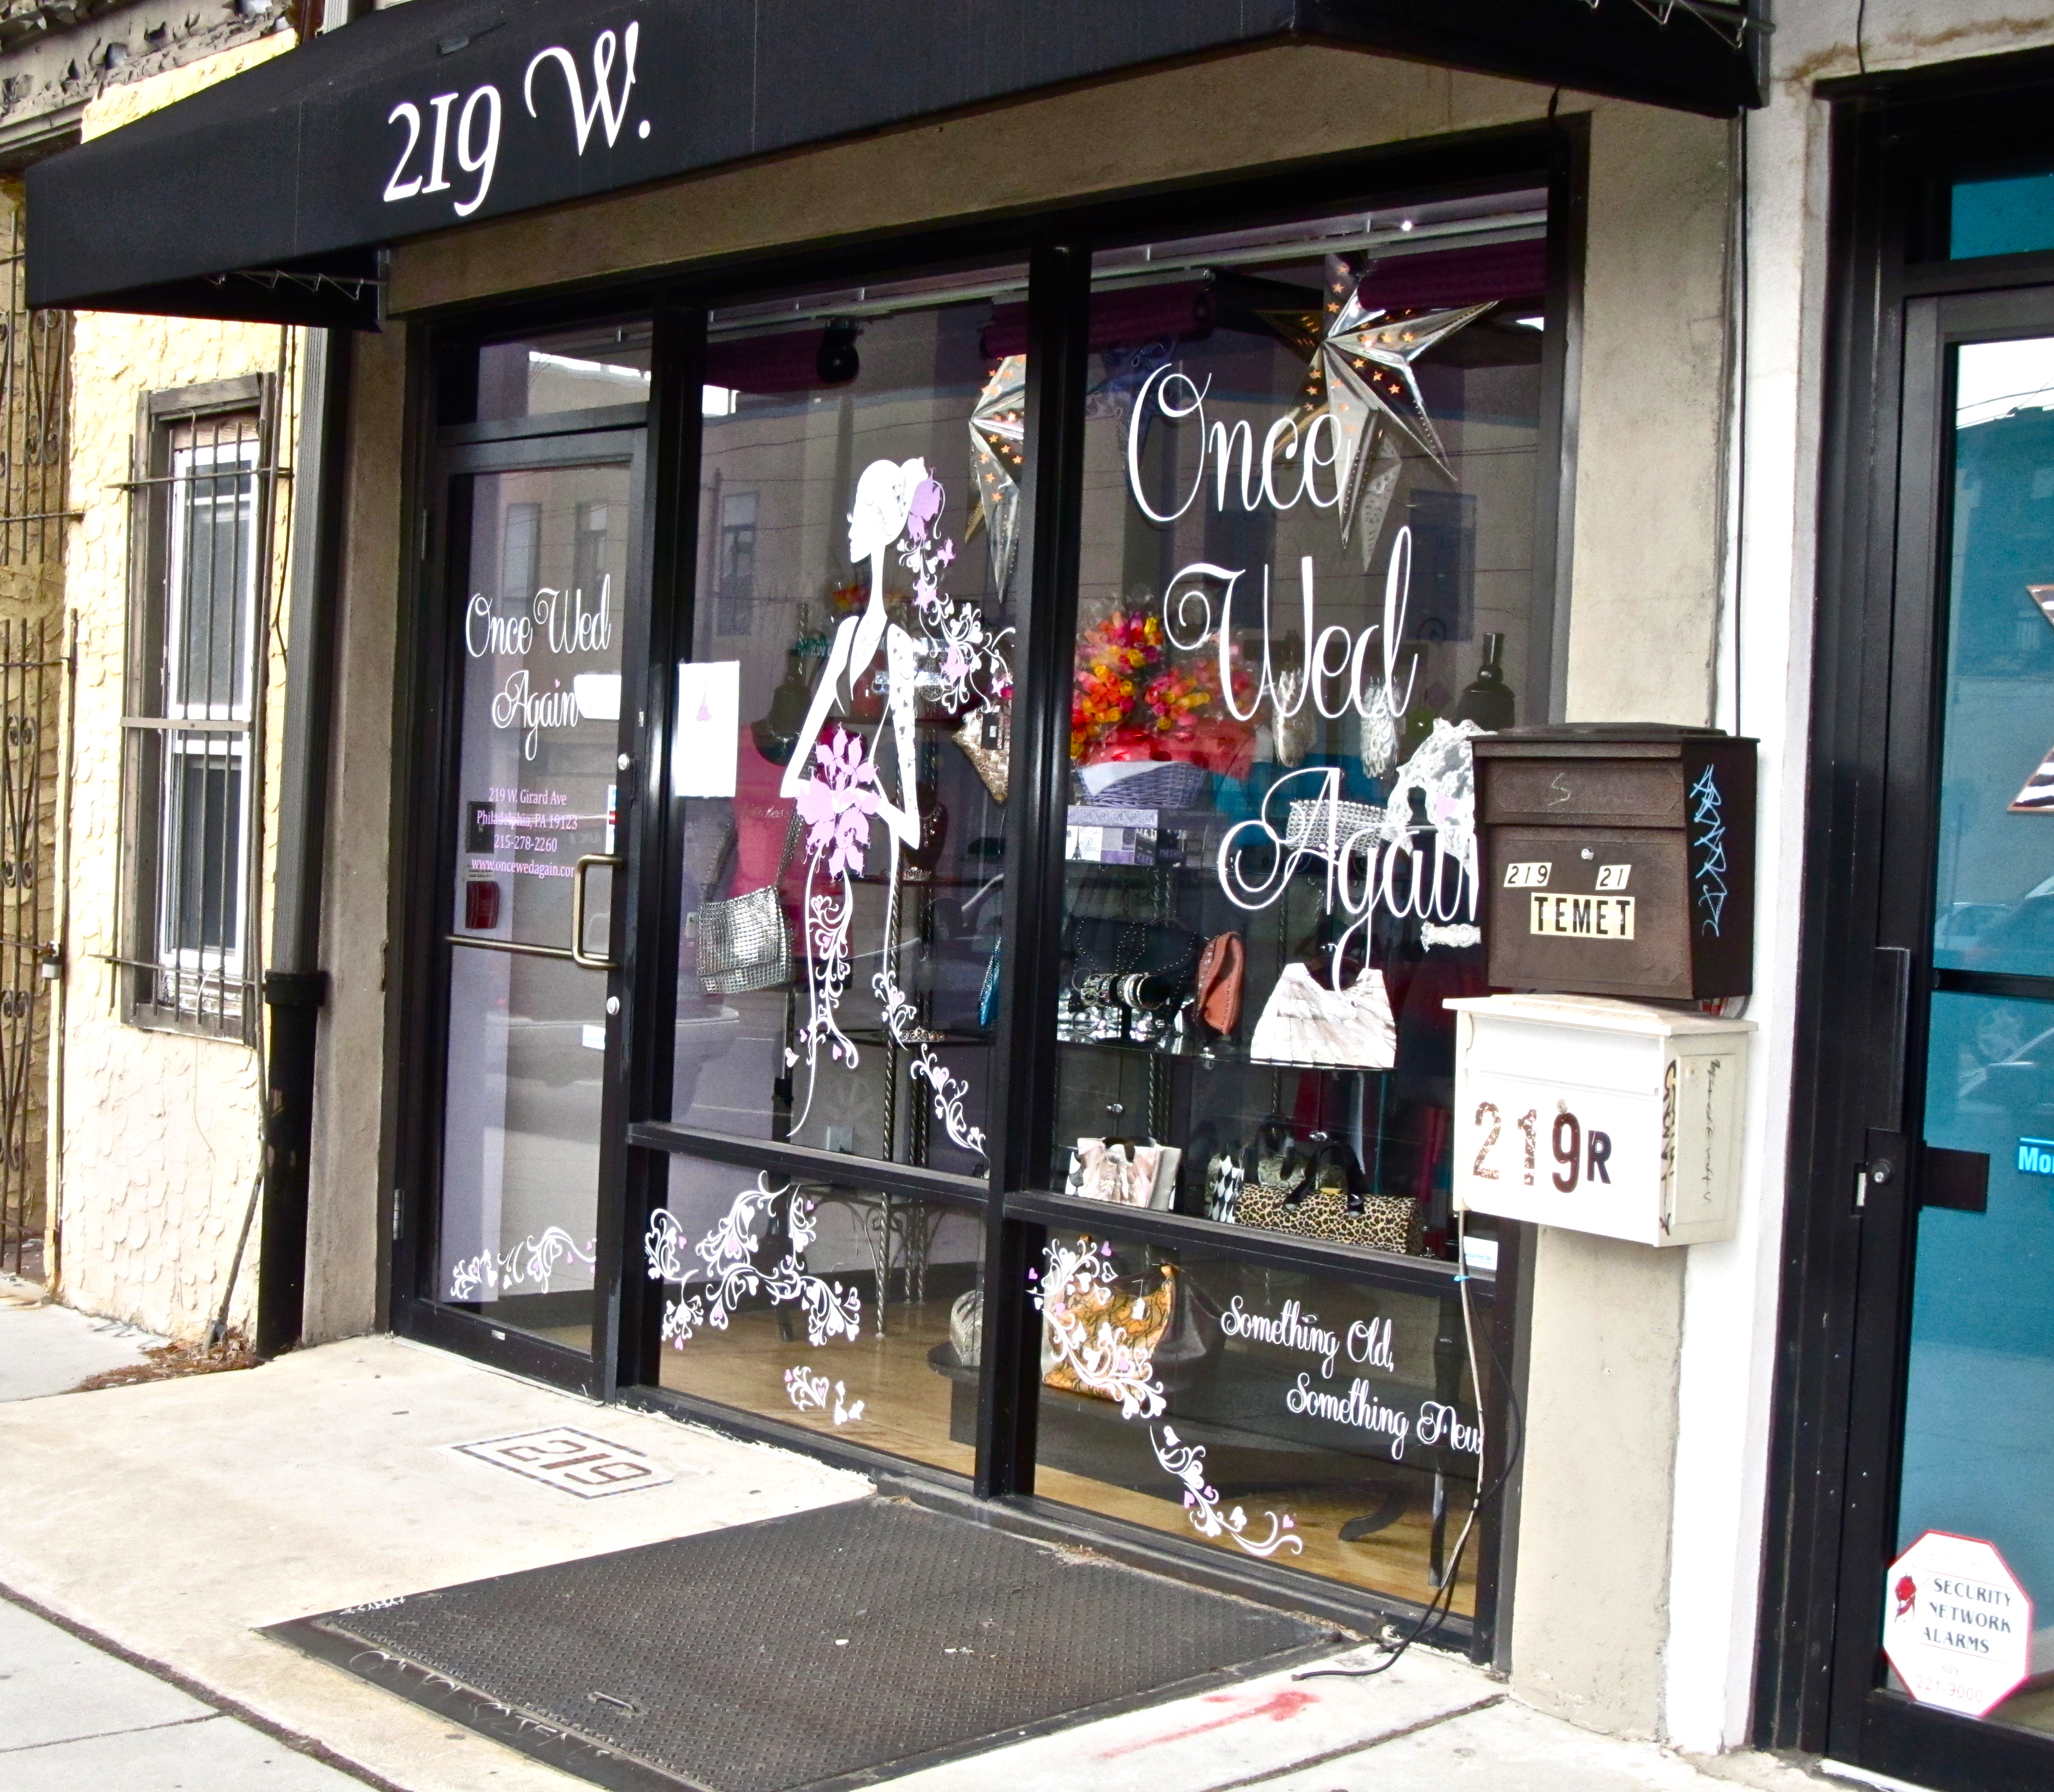 Once Wed Again, Jennifer Waszak’s boutique, is located right next to Kiddie Kouture on Girard Avenue.